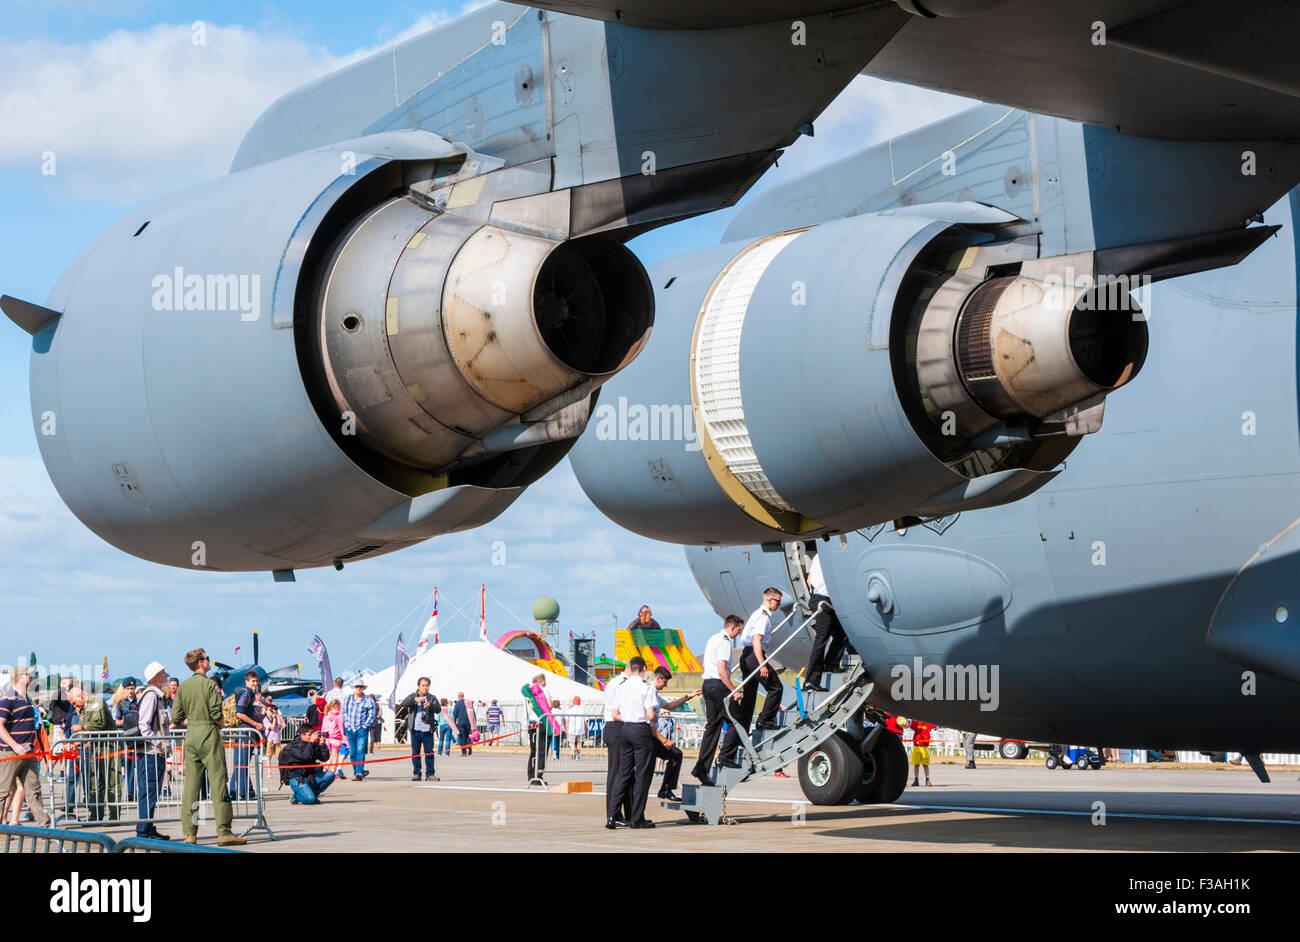 The two port engines of a McDonnell Douglas/Boeing C-17 Globemaster III with the inner engine configured for reverse thrust Stock Photo